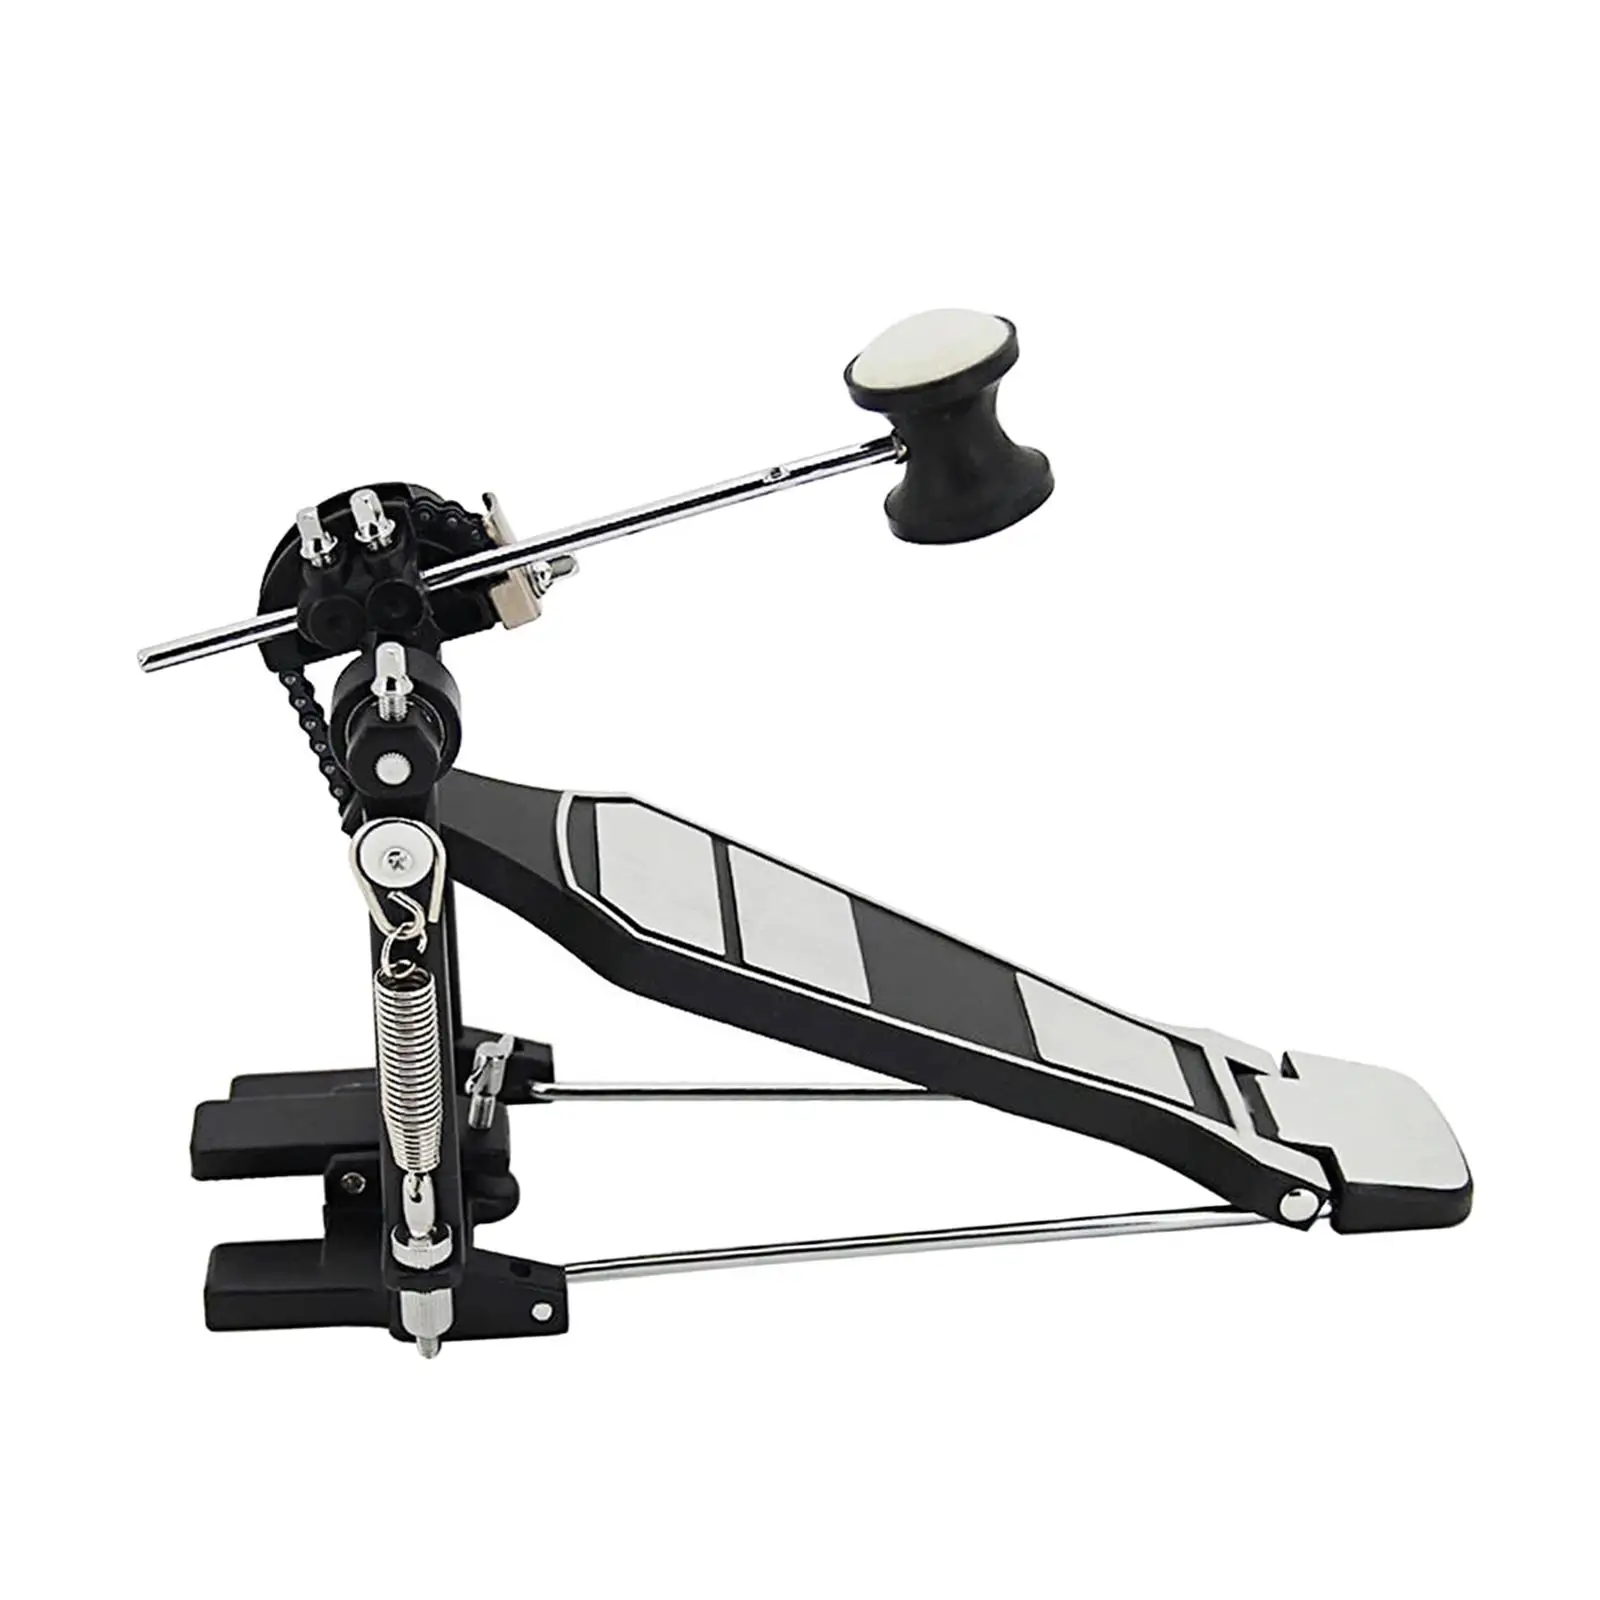 Bass Drum Pedal Heavy Duty Drum Accessories Professional for Electronic Drums Single Bass Drum Pedal Single Kick Drum Pedal